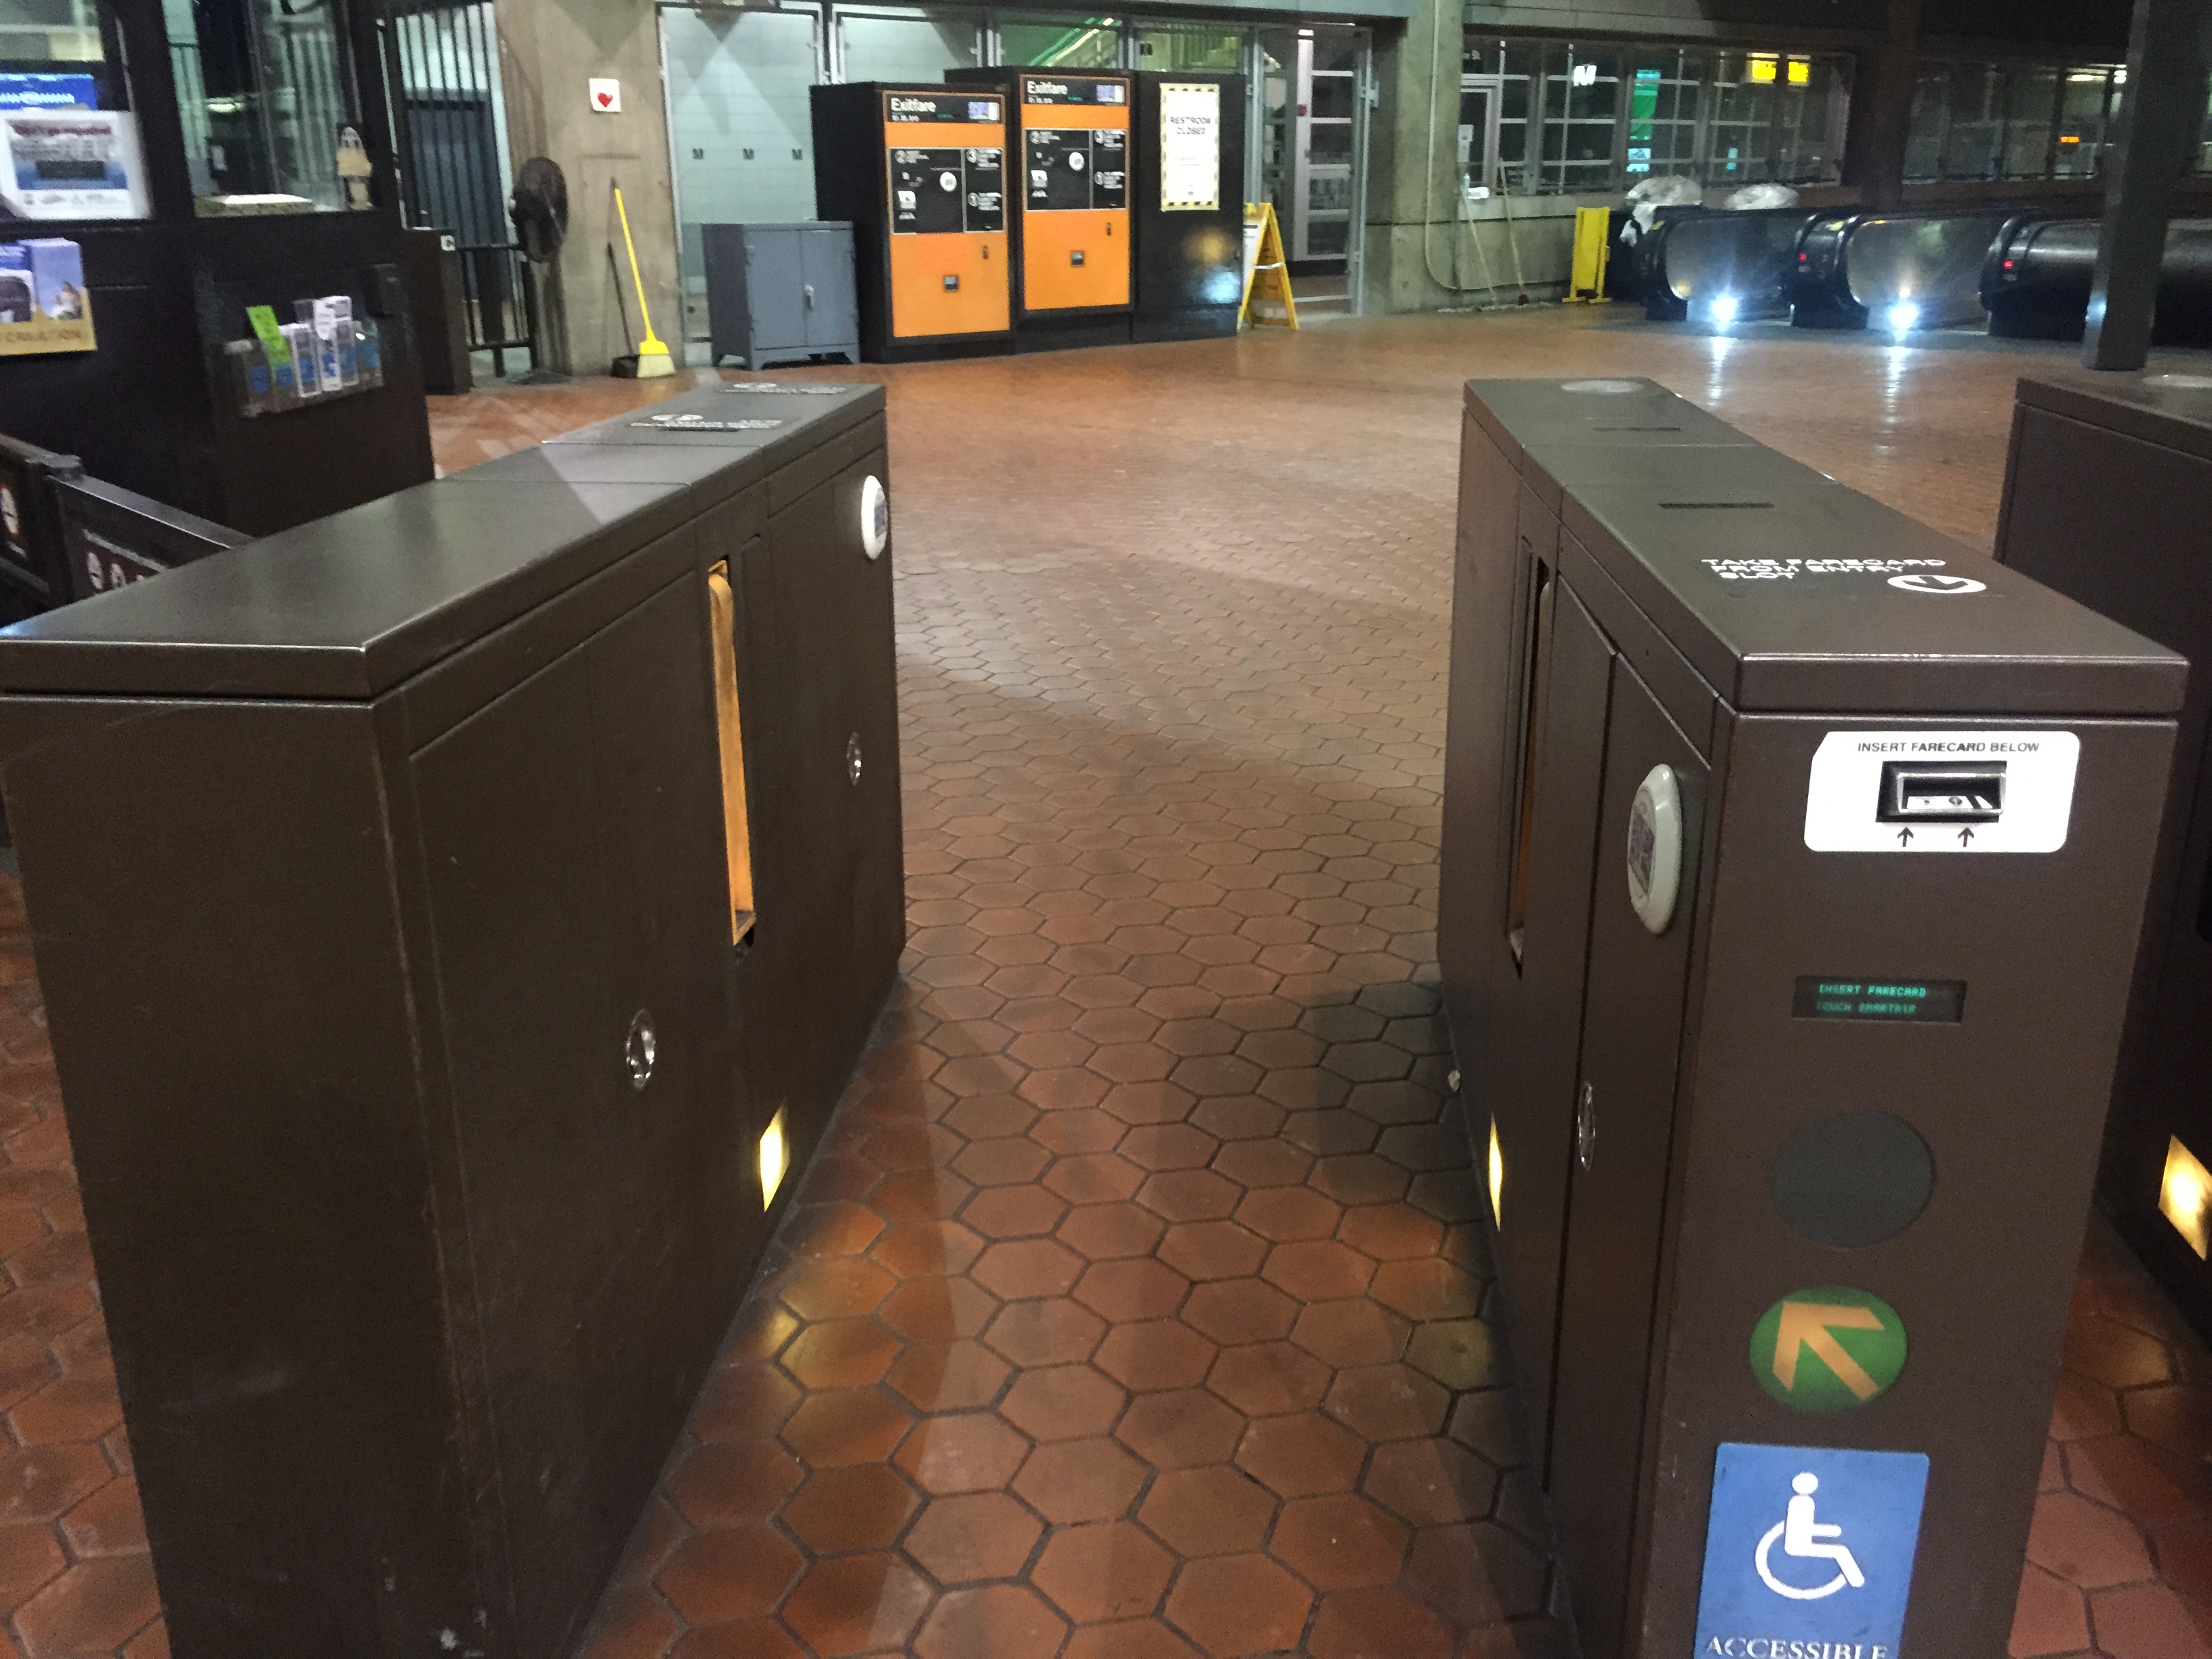 Future Metro SmarTrip options may include key fobs, stickers